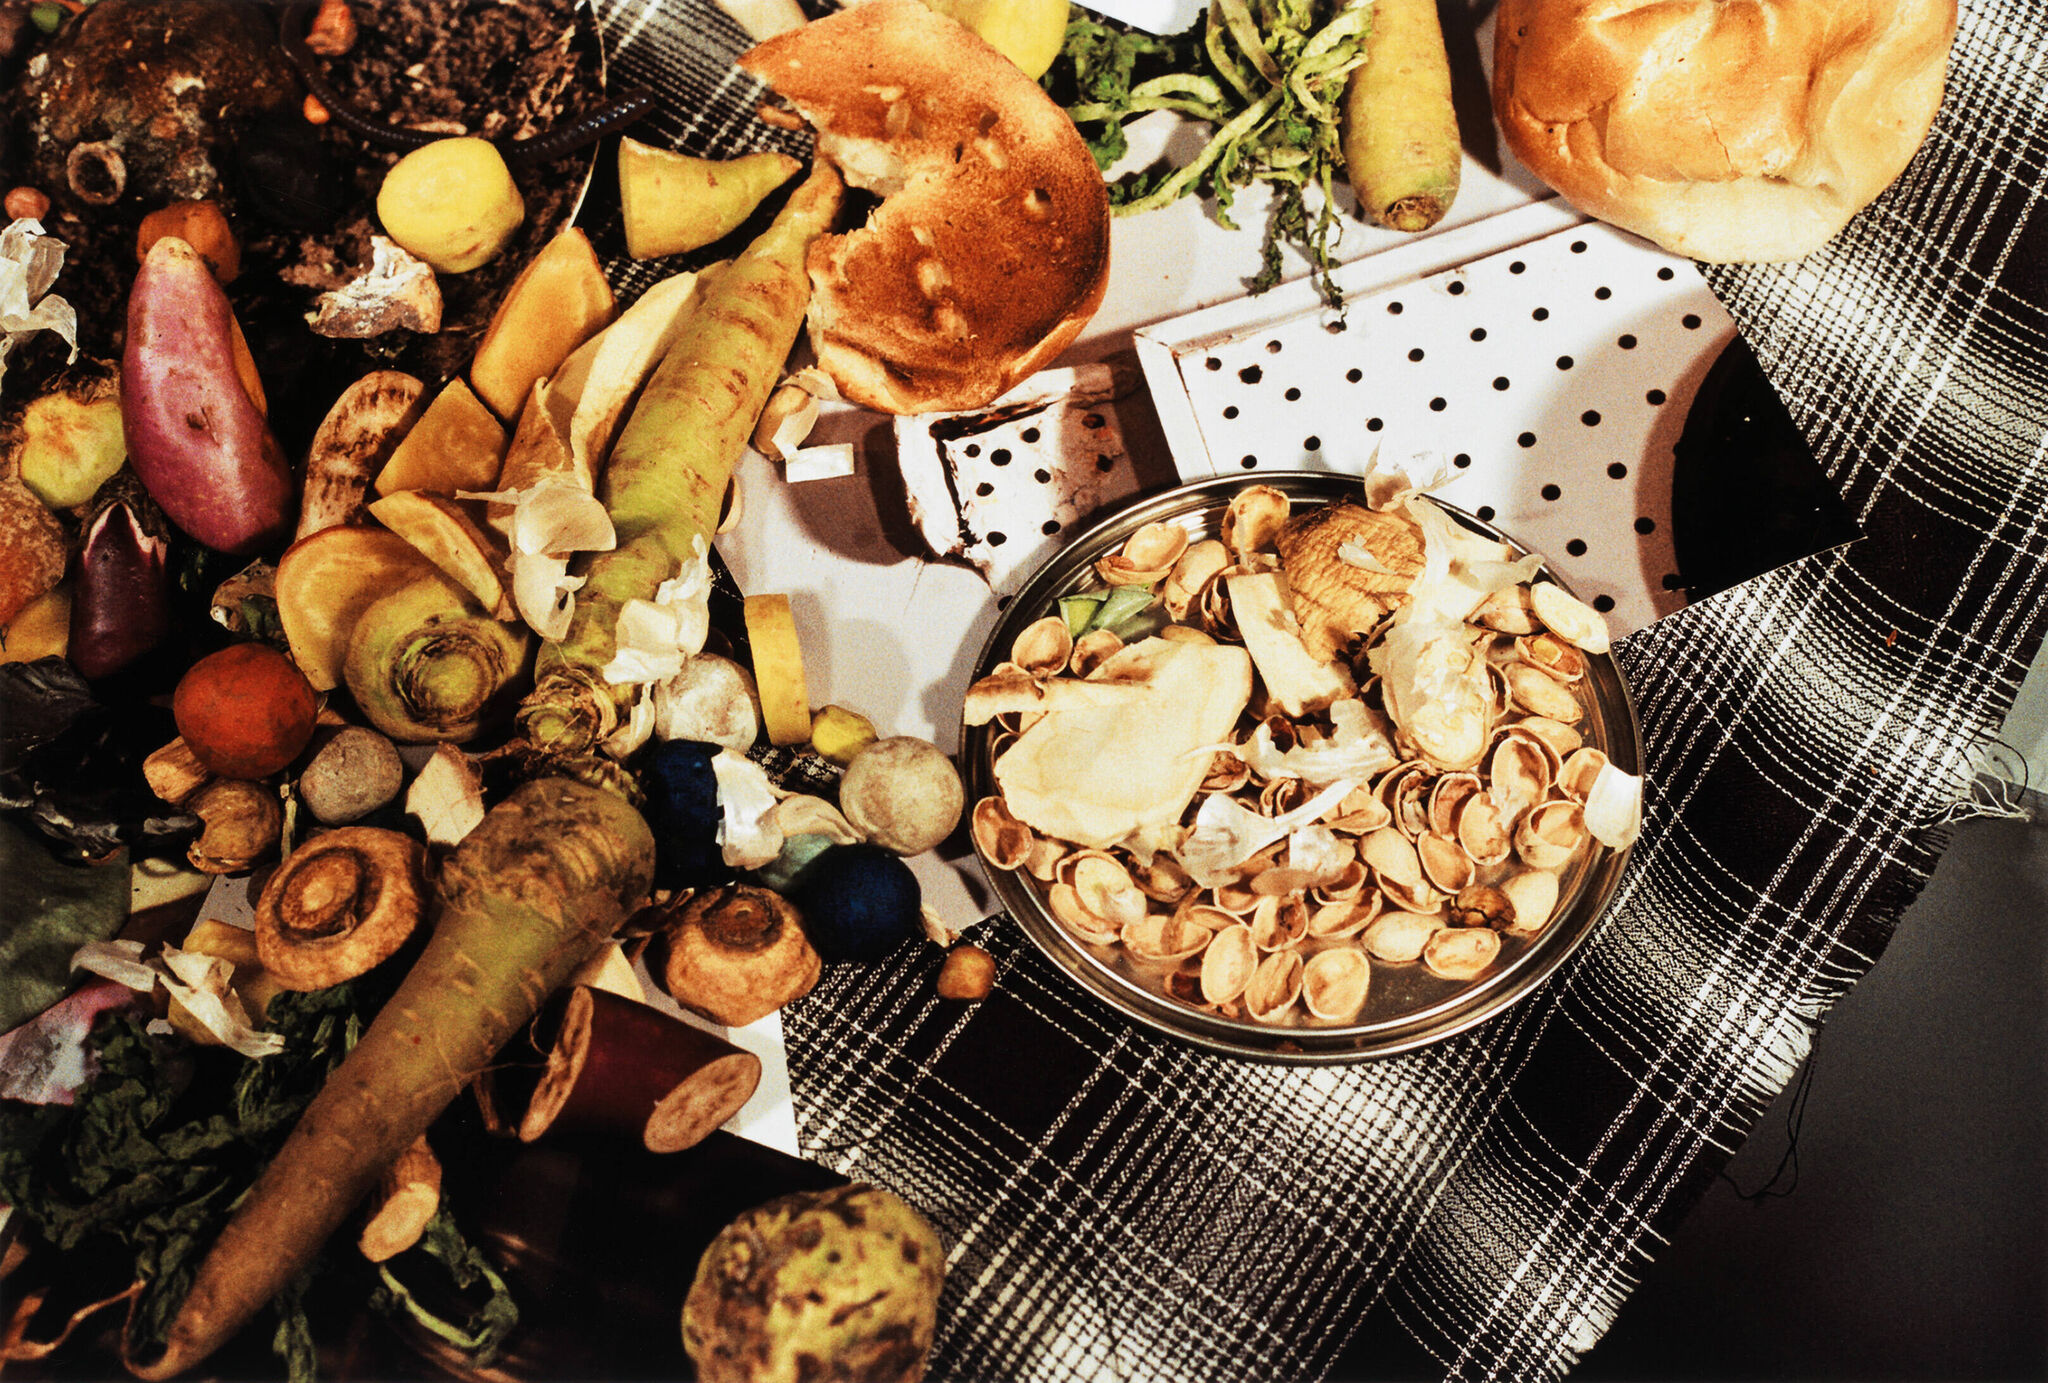 Still life photograph of various foods—including empty pistachio shells, root vegetables, bread loaves, and mushrooms—atop a gingham blanket.